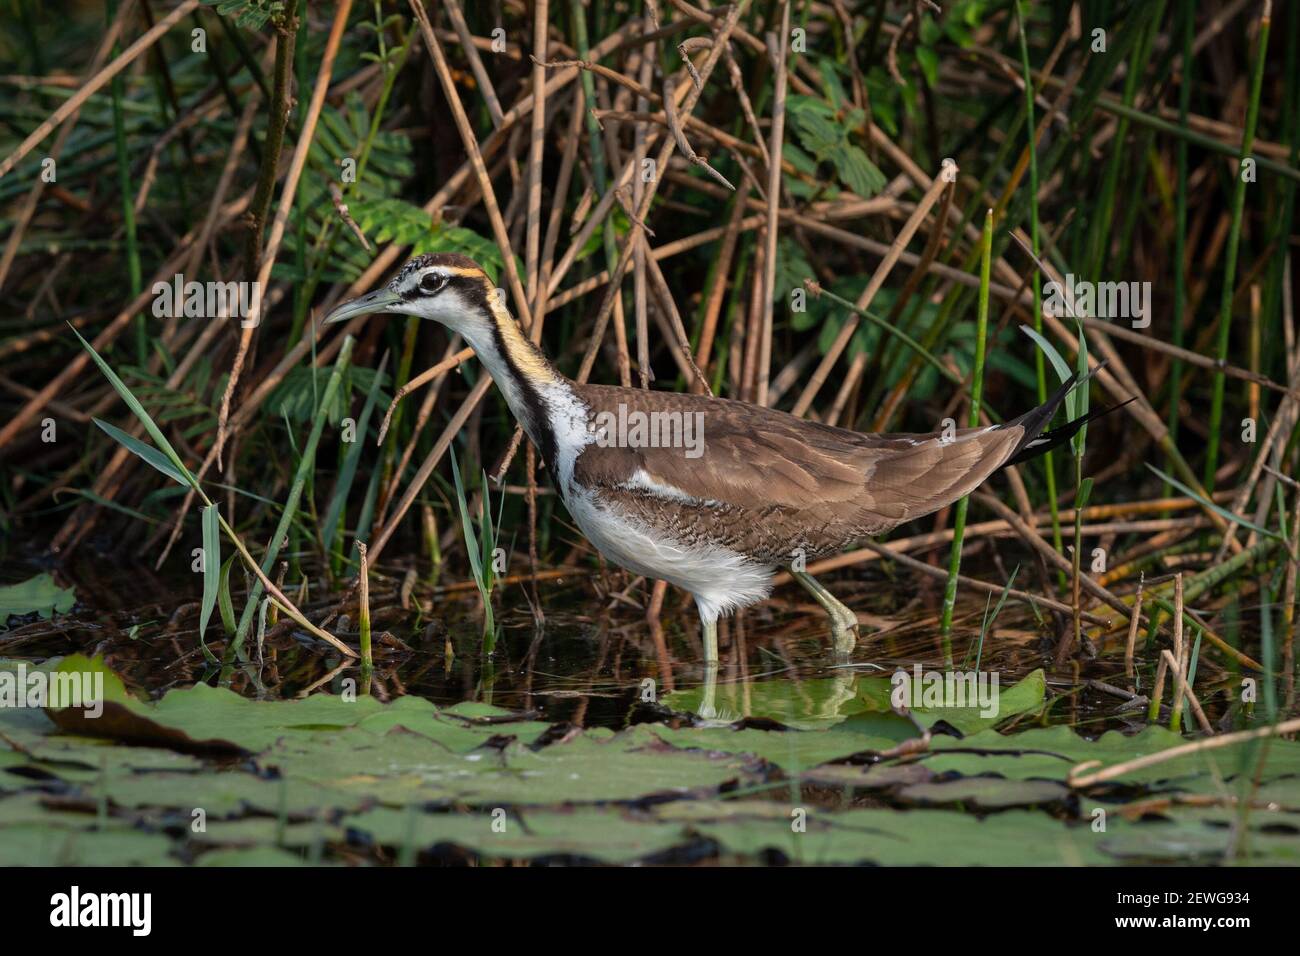 The pheasant-tailed jacana (Hydrophasianus chirurgus) is a jacana in the monotypic genus Hydrophasianus. Stock Photo